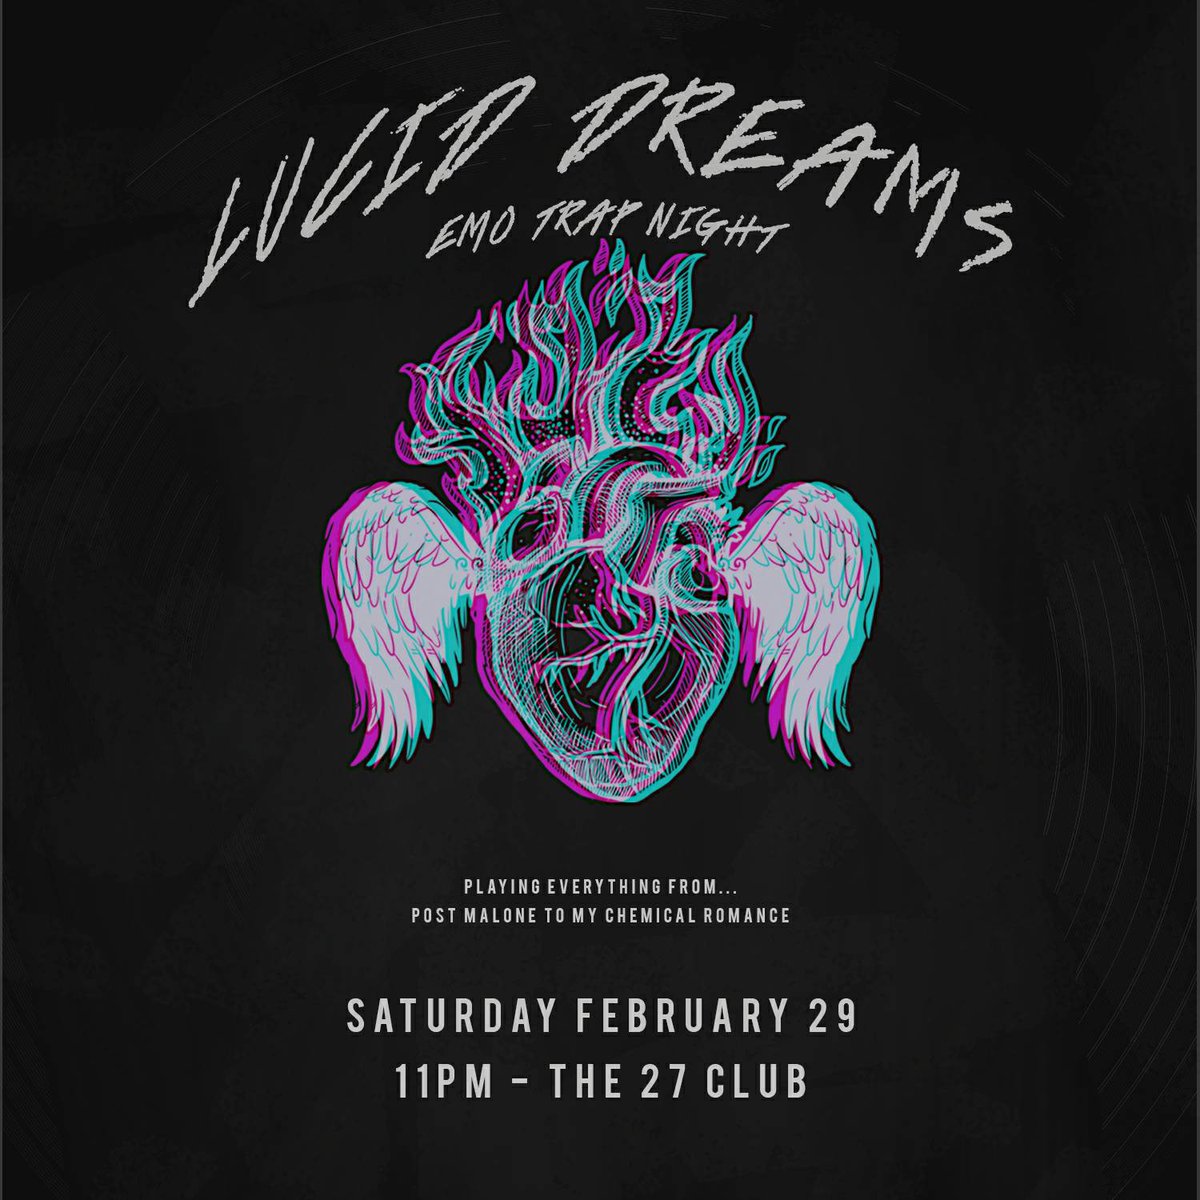 Tonight LUCID DREAMS Featuring music from Juice WRLD - My Chemical Romance - Lil Peep - Paramore - Post Malone - Good Charlotte - $uicideboy$ - The Used - Ghostmane - Blink 182 - Lil Uzi Vert - Panic at The Disco - YungGoth - Fall Out Boy - nothing,nowhere. AND MORE